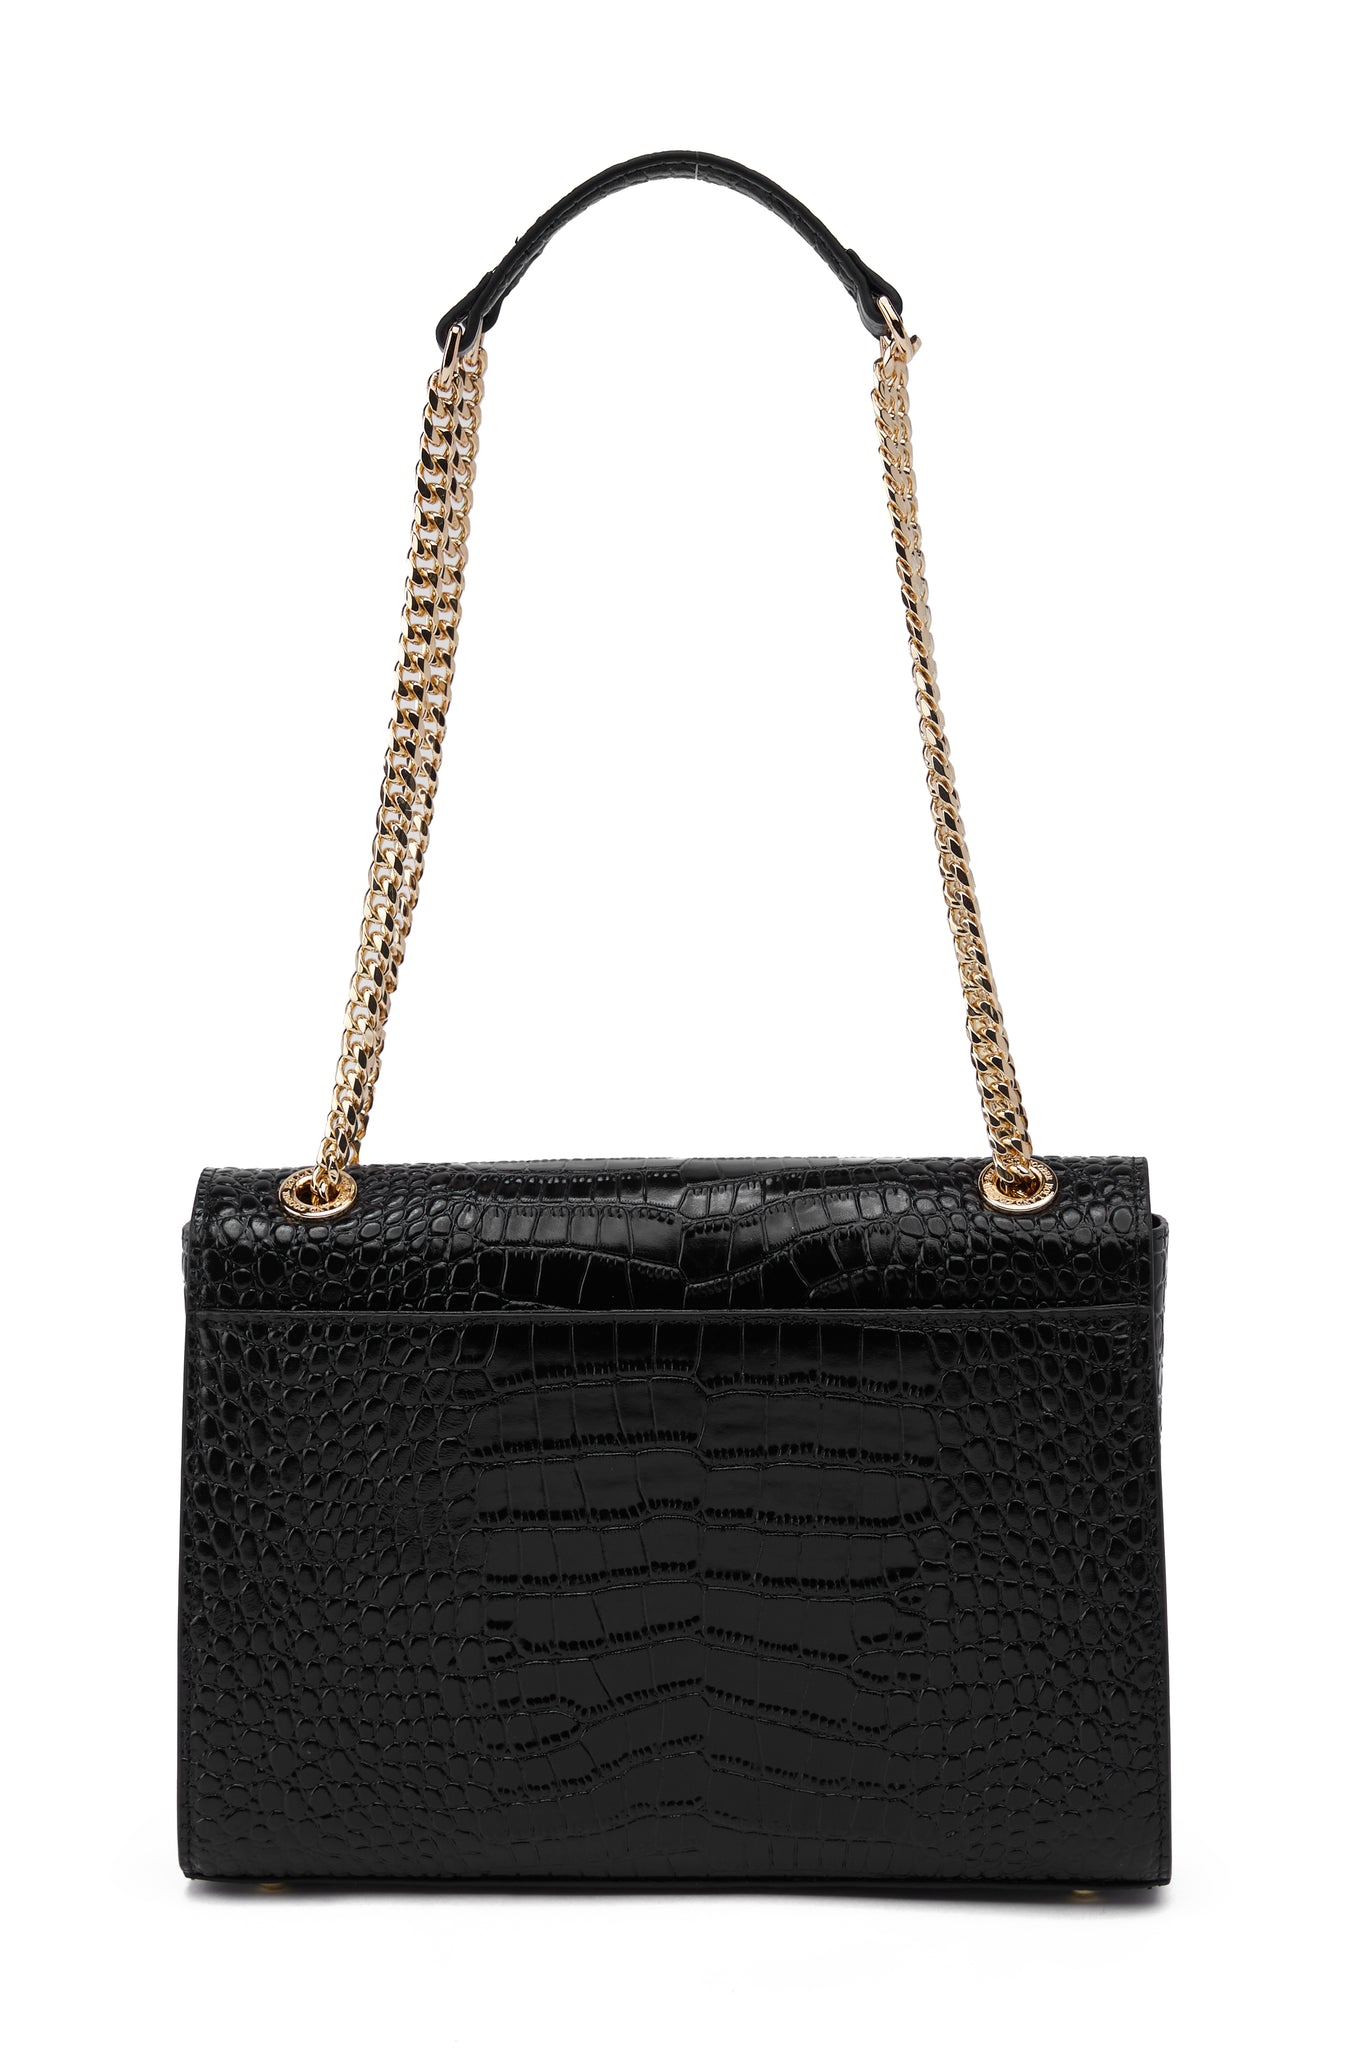 back womens black croc embossed leather shoulder bag with gold hardware and chain